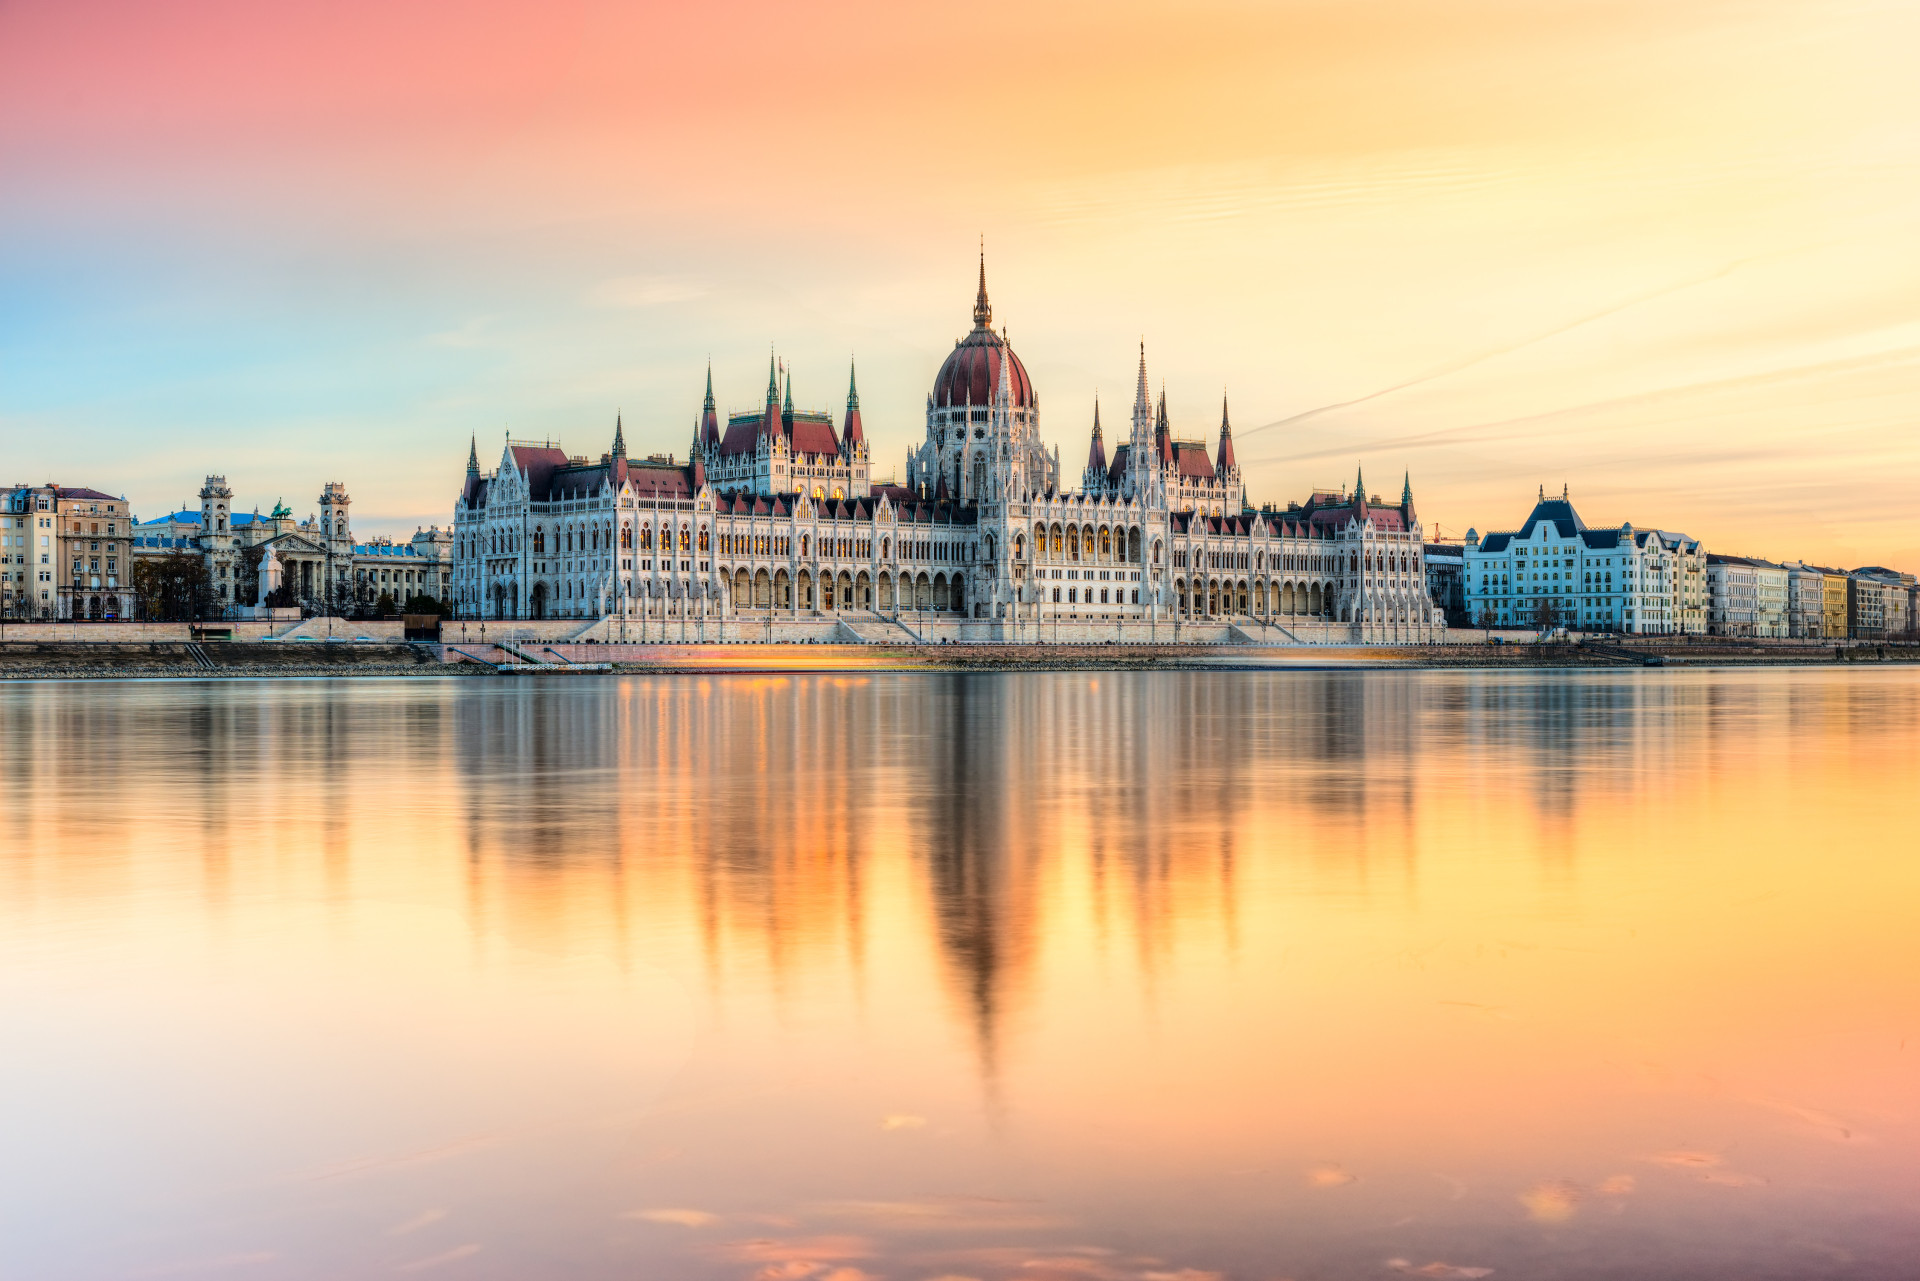 The city of Budapest is divided into Buda and Pest, with the Danube river running between them. The beautiful Hungarian capital is a great destination for <a href="https://uk.starsinsider.com/travel/222457/incredible-european-destinations-that-are-surprisingly-cheap">budget </a>travelers.<p><a href="https://www.msn.com/en-us/community/channel/vid-7xx8mnucu55yw63we9va2gwr7uihbxwc68fxqp25x6tg4ftibpra?cvid=94631541bc0f4f89bfd59158d696ad7e">Follow us and access great exclusive content every day</a></p>